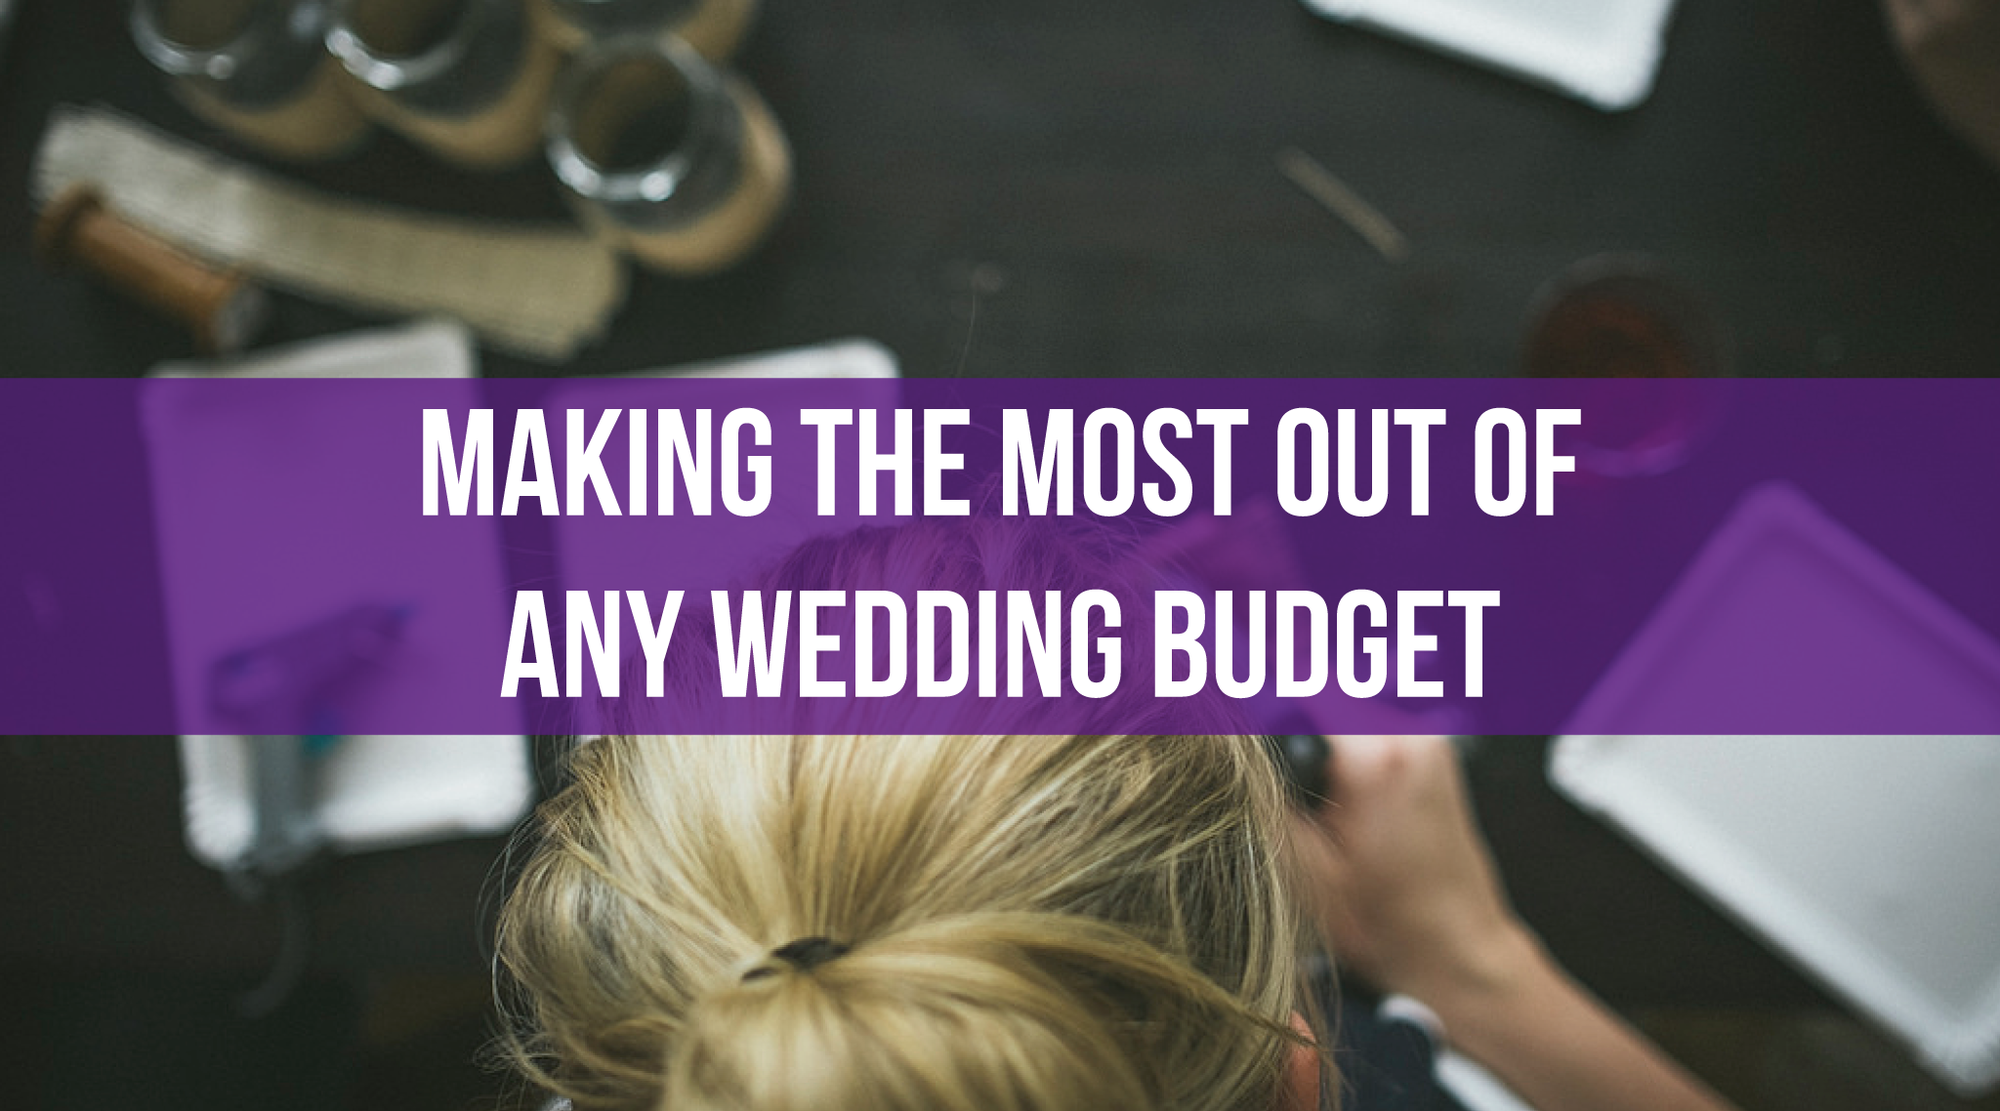 Making the Most Out of Any Wedding Budget